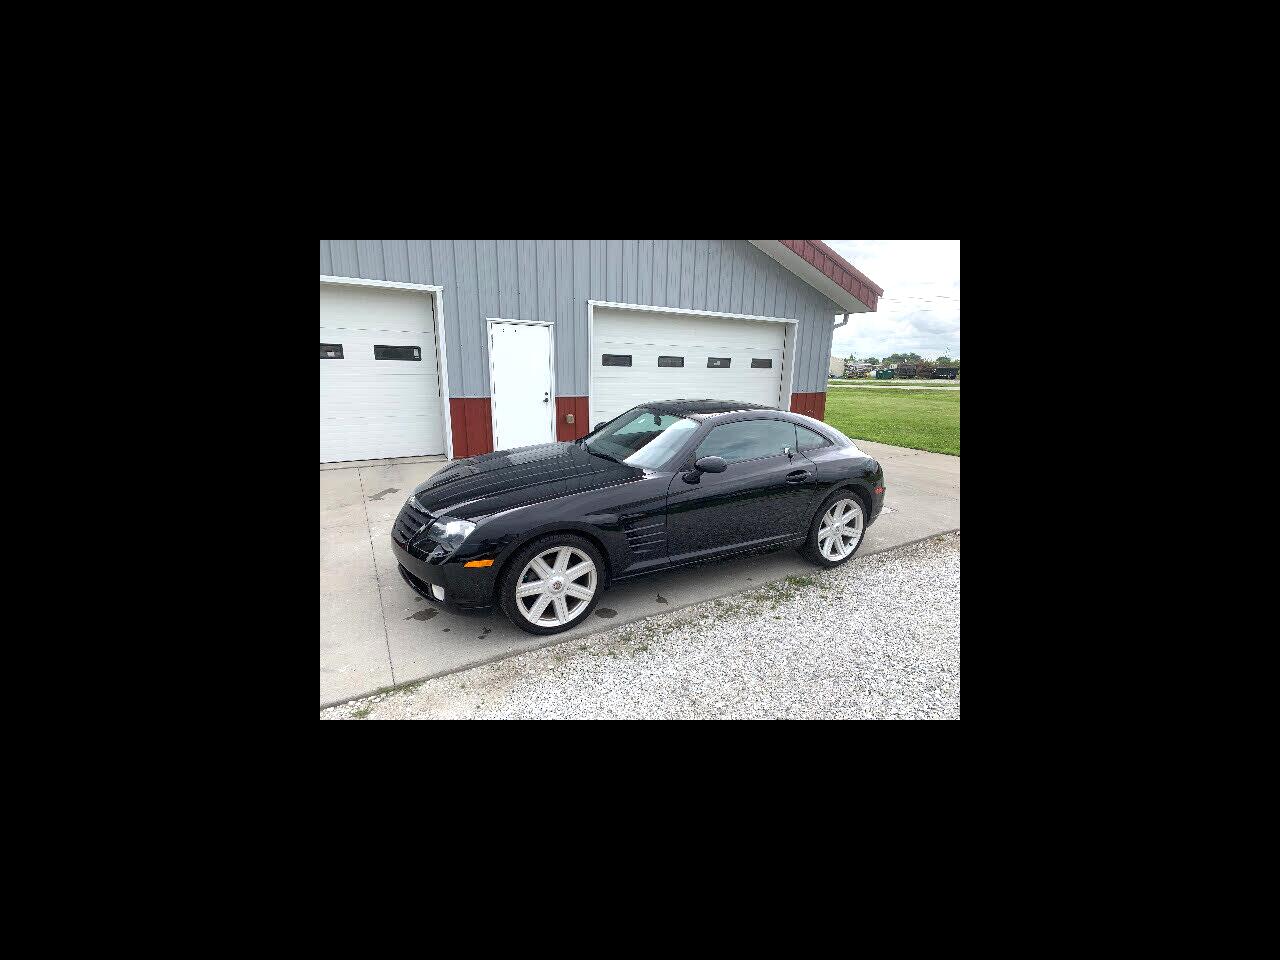 2007 Chrysler Crossfire Coupe